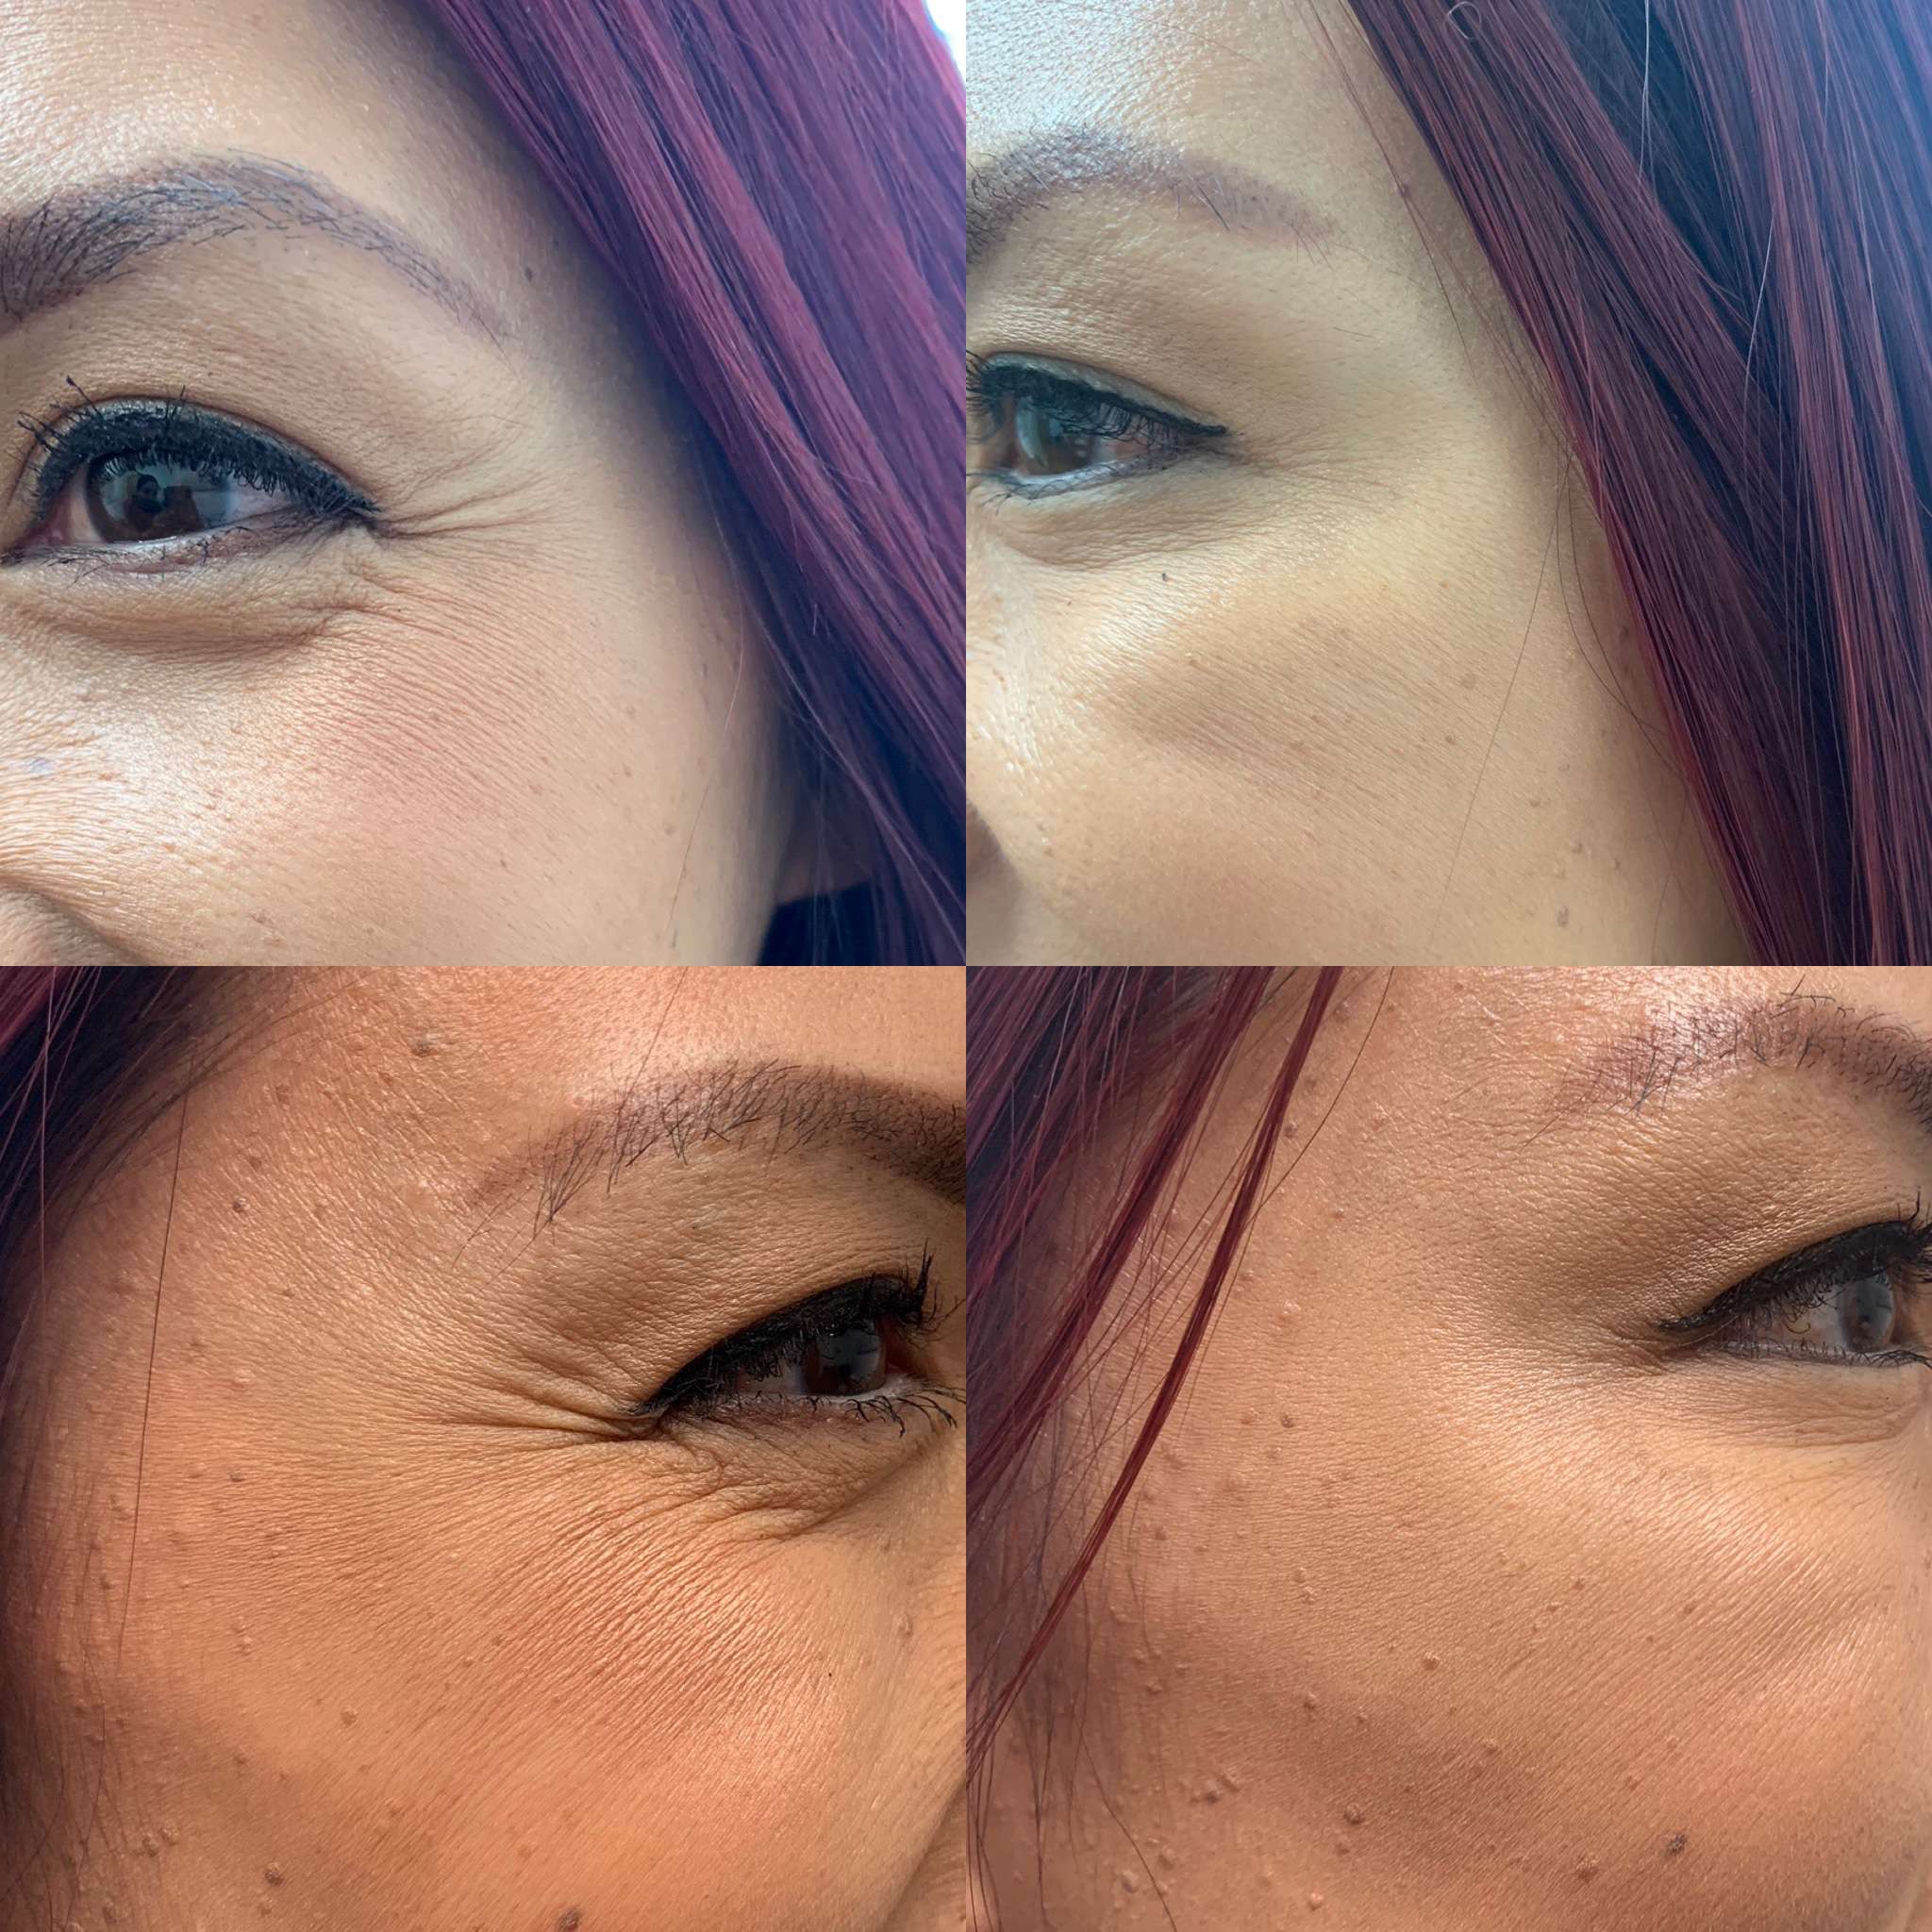 Before and After Botox Crows BL Bunny treatment | Beauty Boost Med Spa in Newport Beach, CA